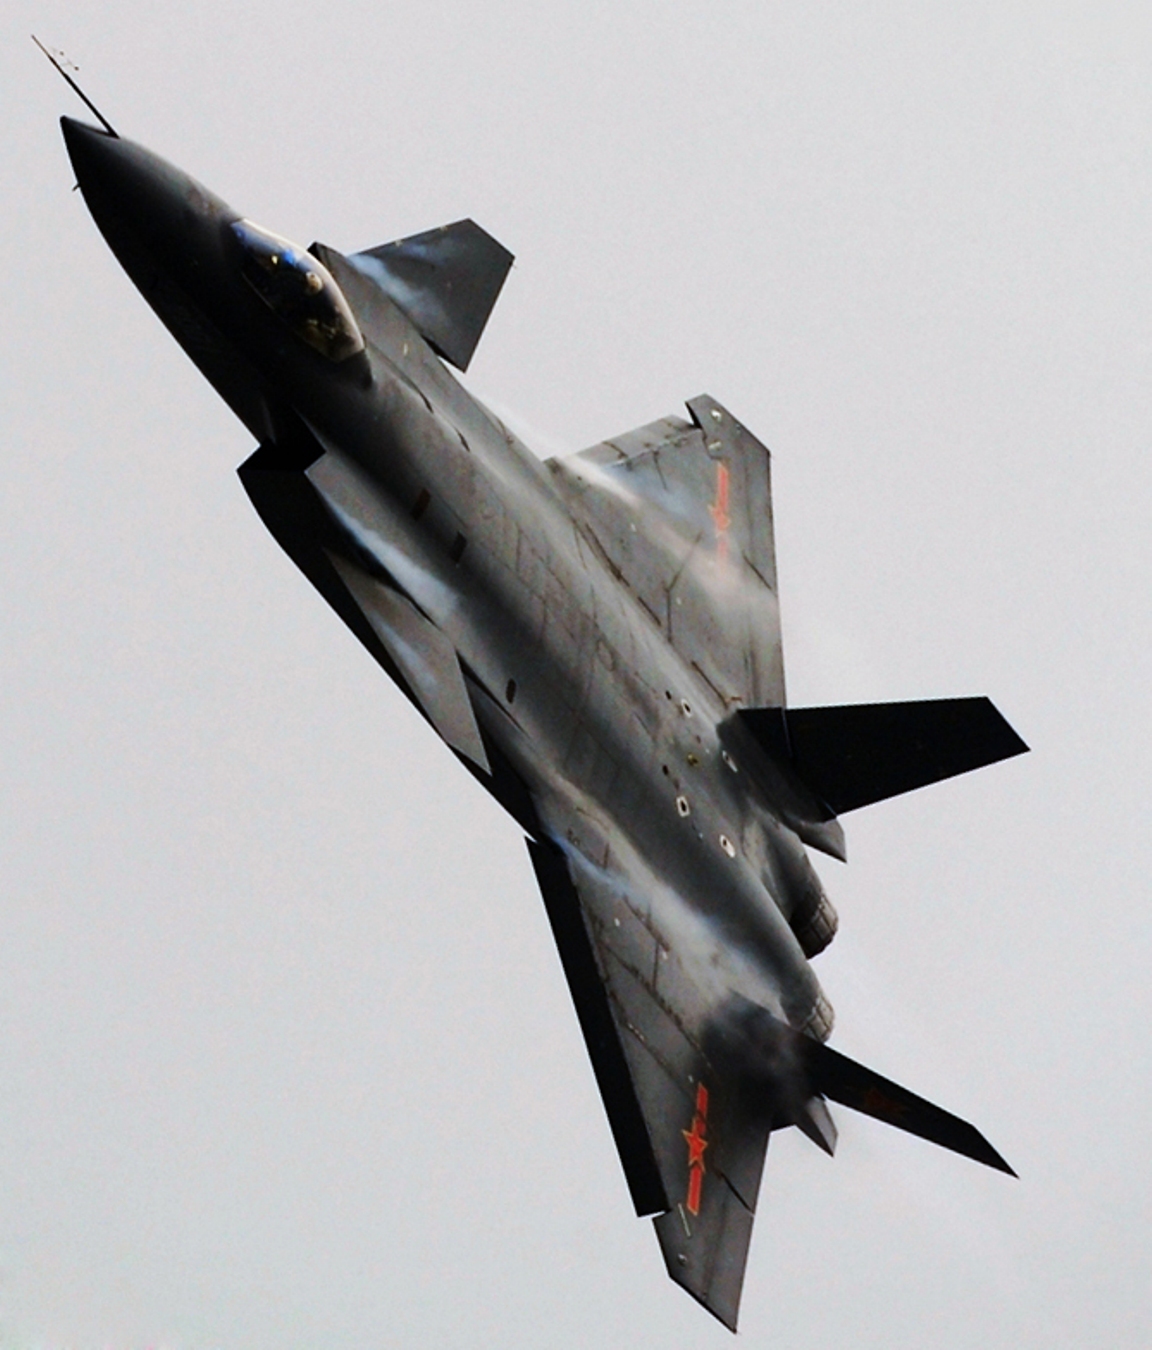 J-20+Mighty+Dragon++Chengdu+J-20+fifth+generation+stealth,+twin-engine+fighter+aircraft+prototype+People's+Liberation+Army+Air+Force++OPERATIONAL+weapons+aam+bvr+missile+ls+pgm+gps+plaaf+test+flight+2012+(1).jpg